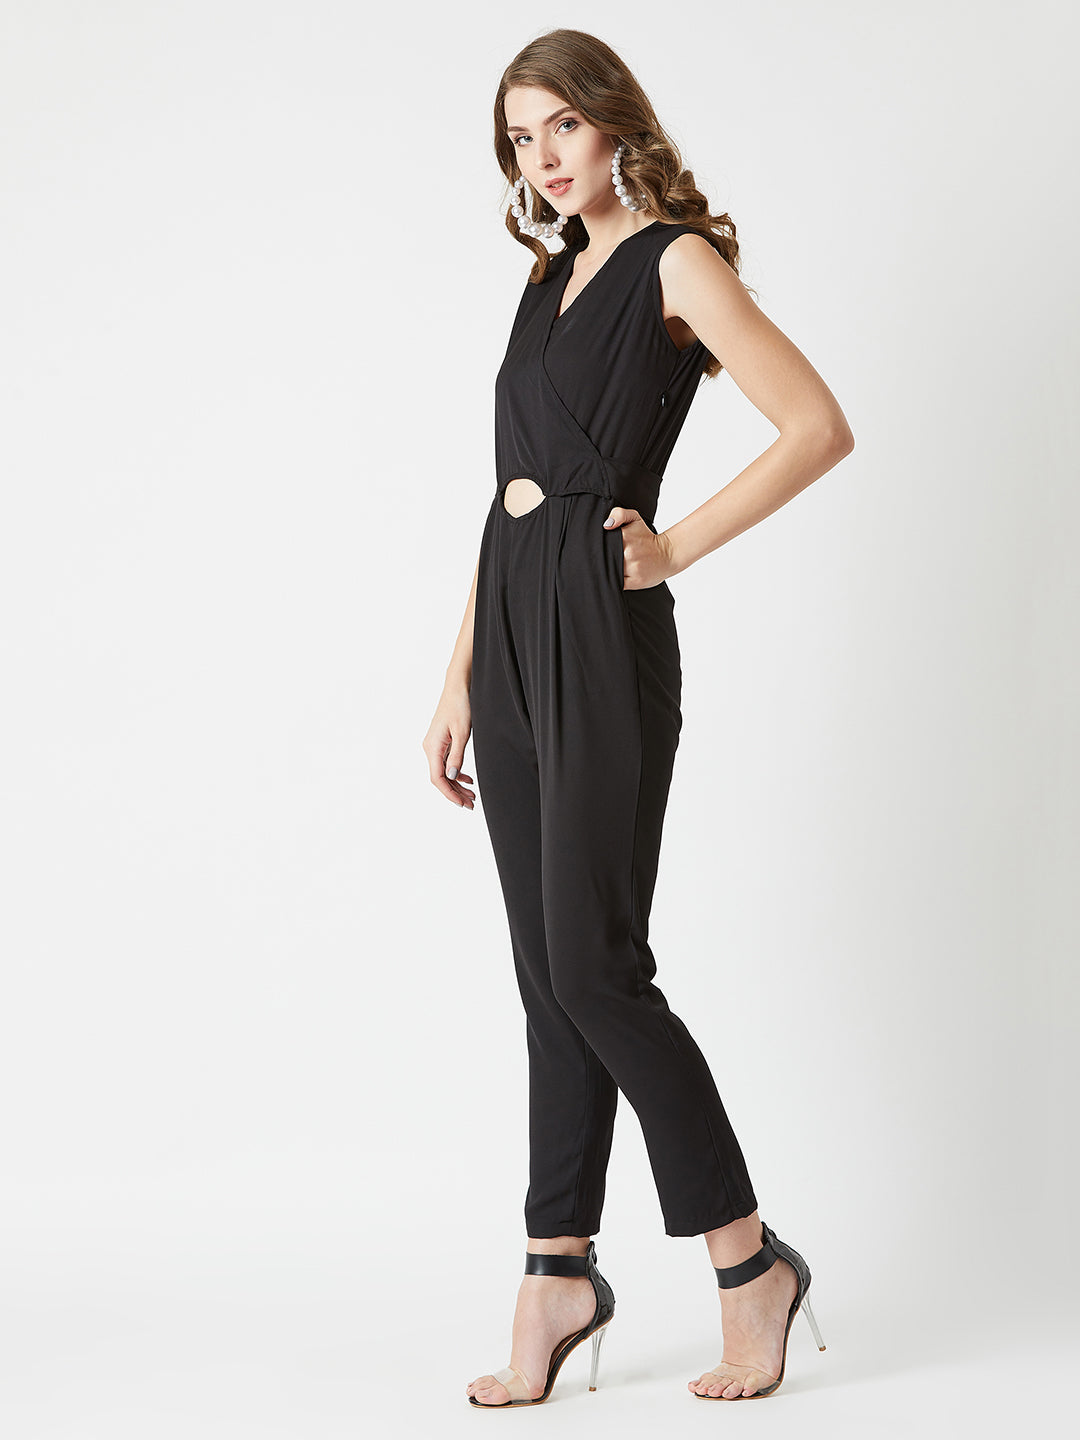 Women's Black V-Neck Sleeveless Solid Belted Cut-out Tie-Up Wrap Jumpsuit